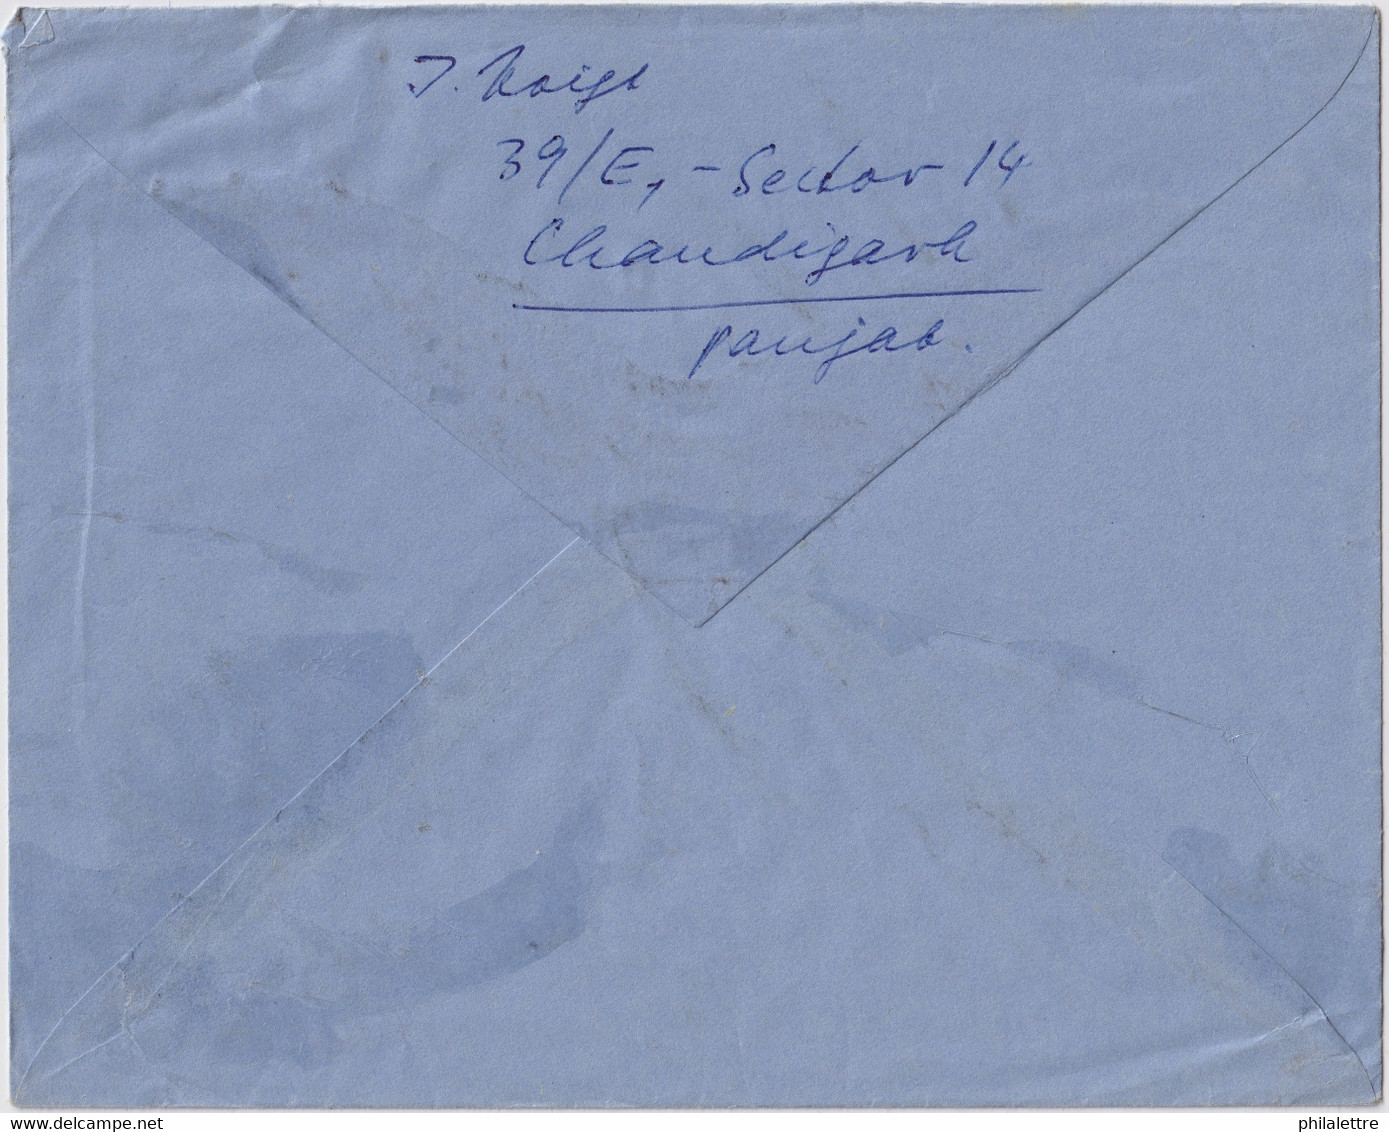 INDE / INDIA - 1962 - Air Mail Postal Envelope From CHANDIGARH To Kiel, Germany - Aerogramme